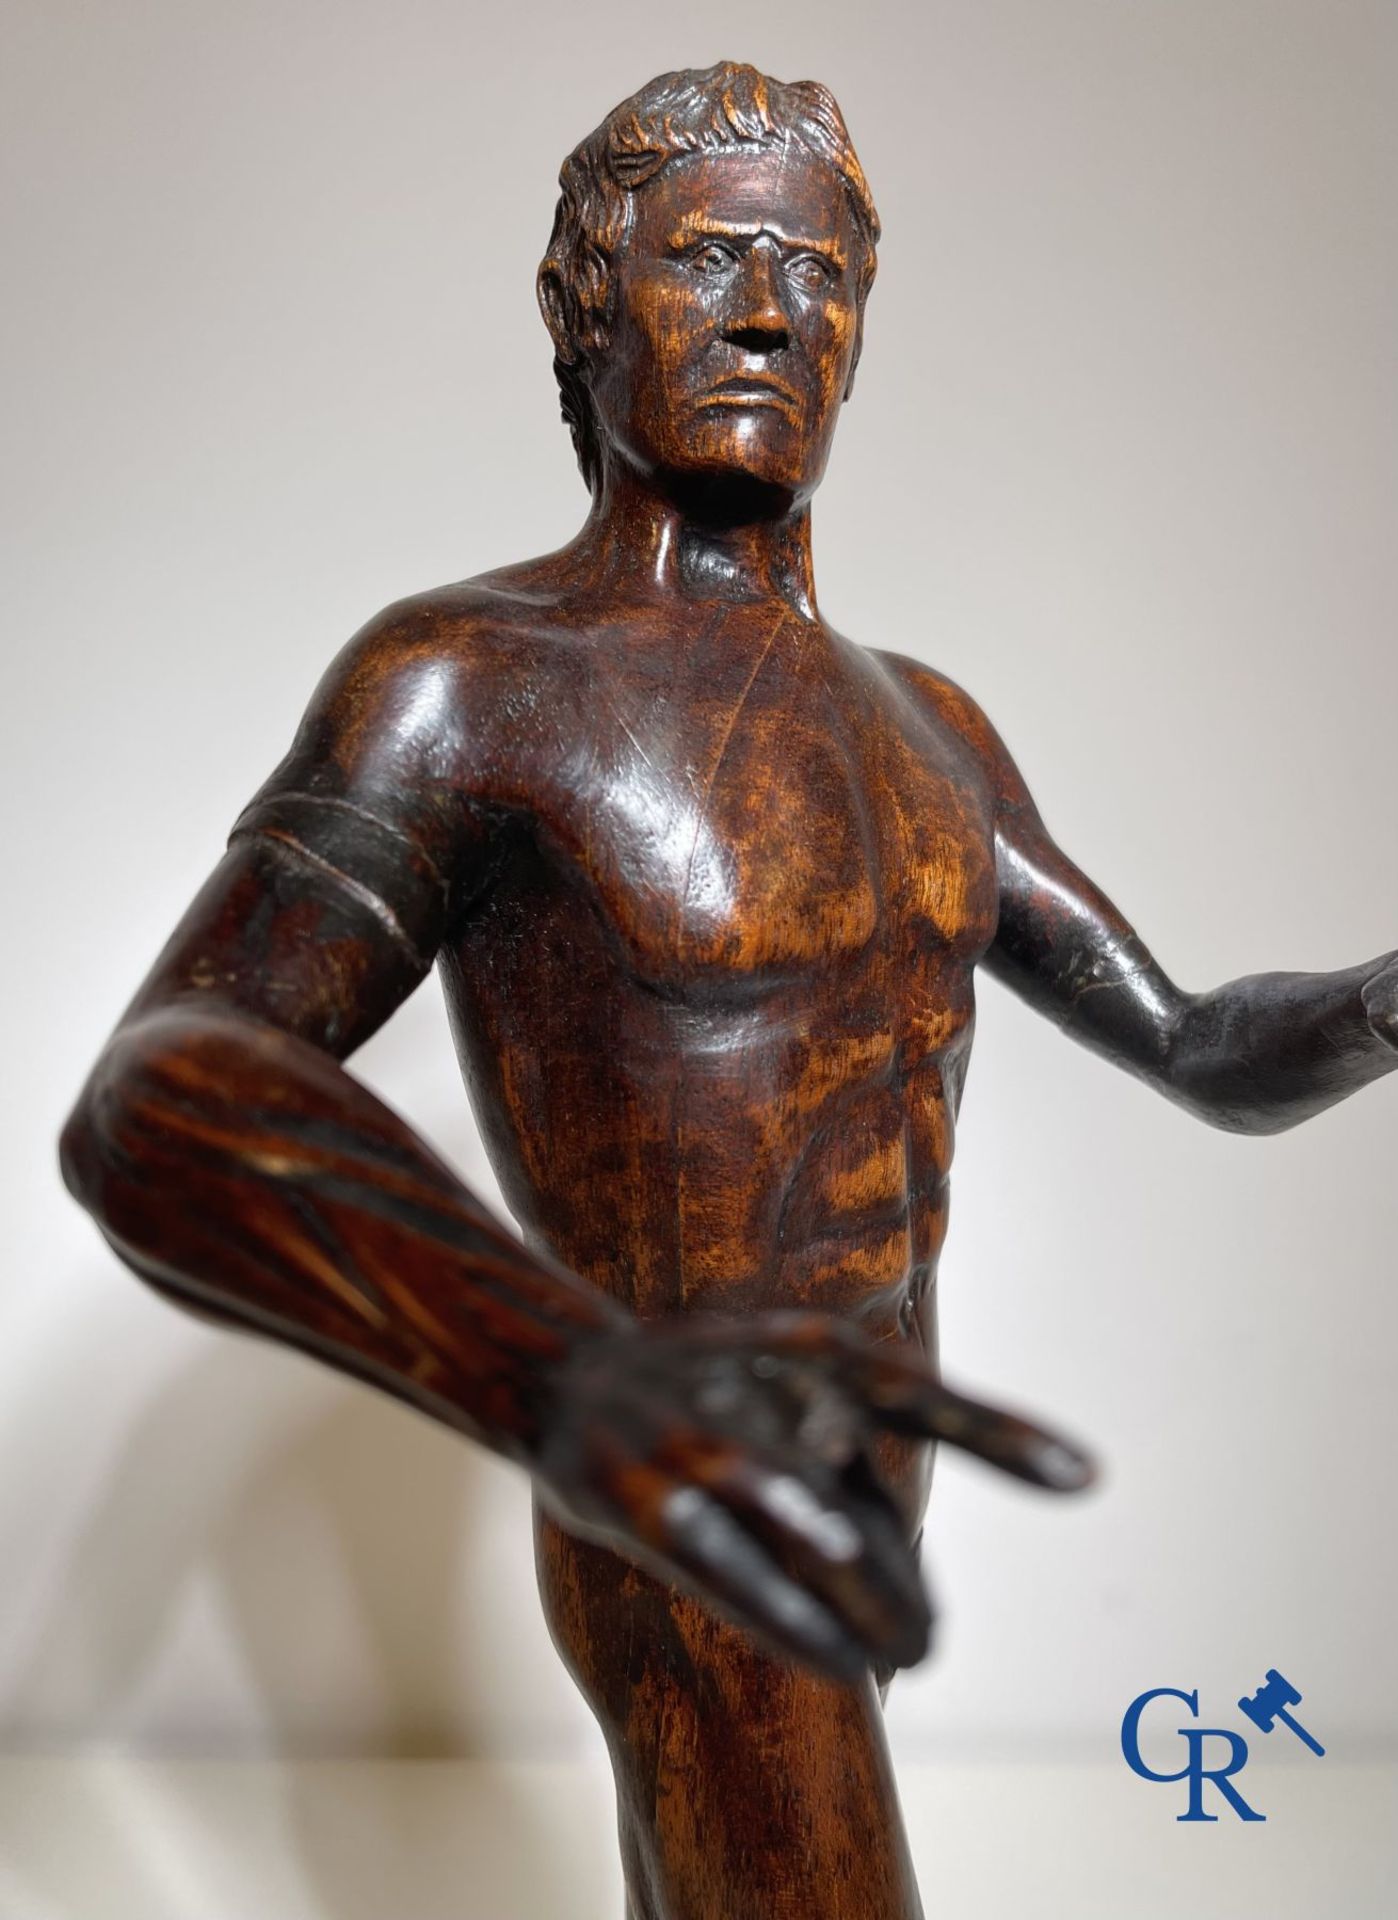 A wooden sculpted model of a standing man. Germany or Italy, 18th-19th century.